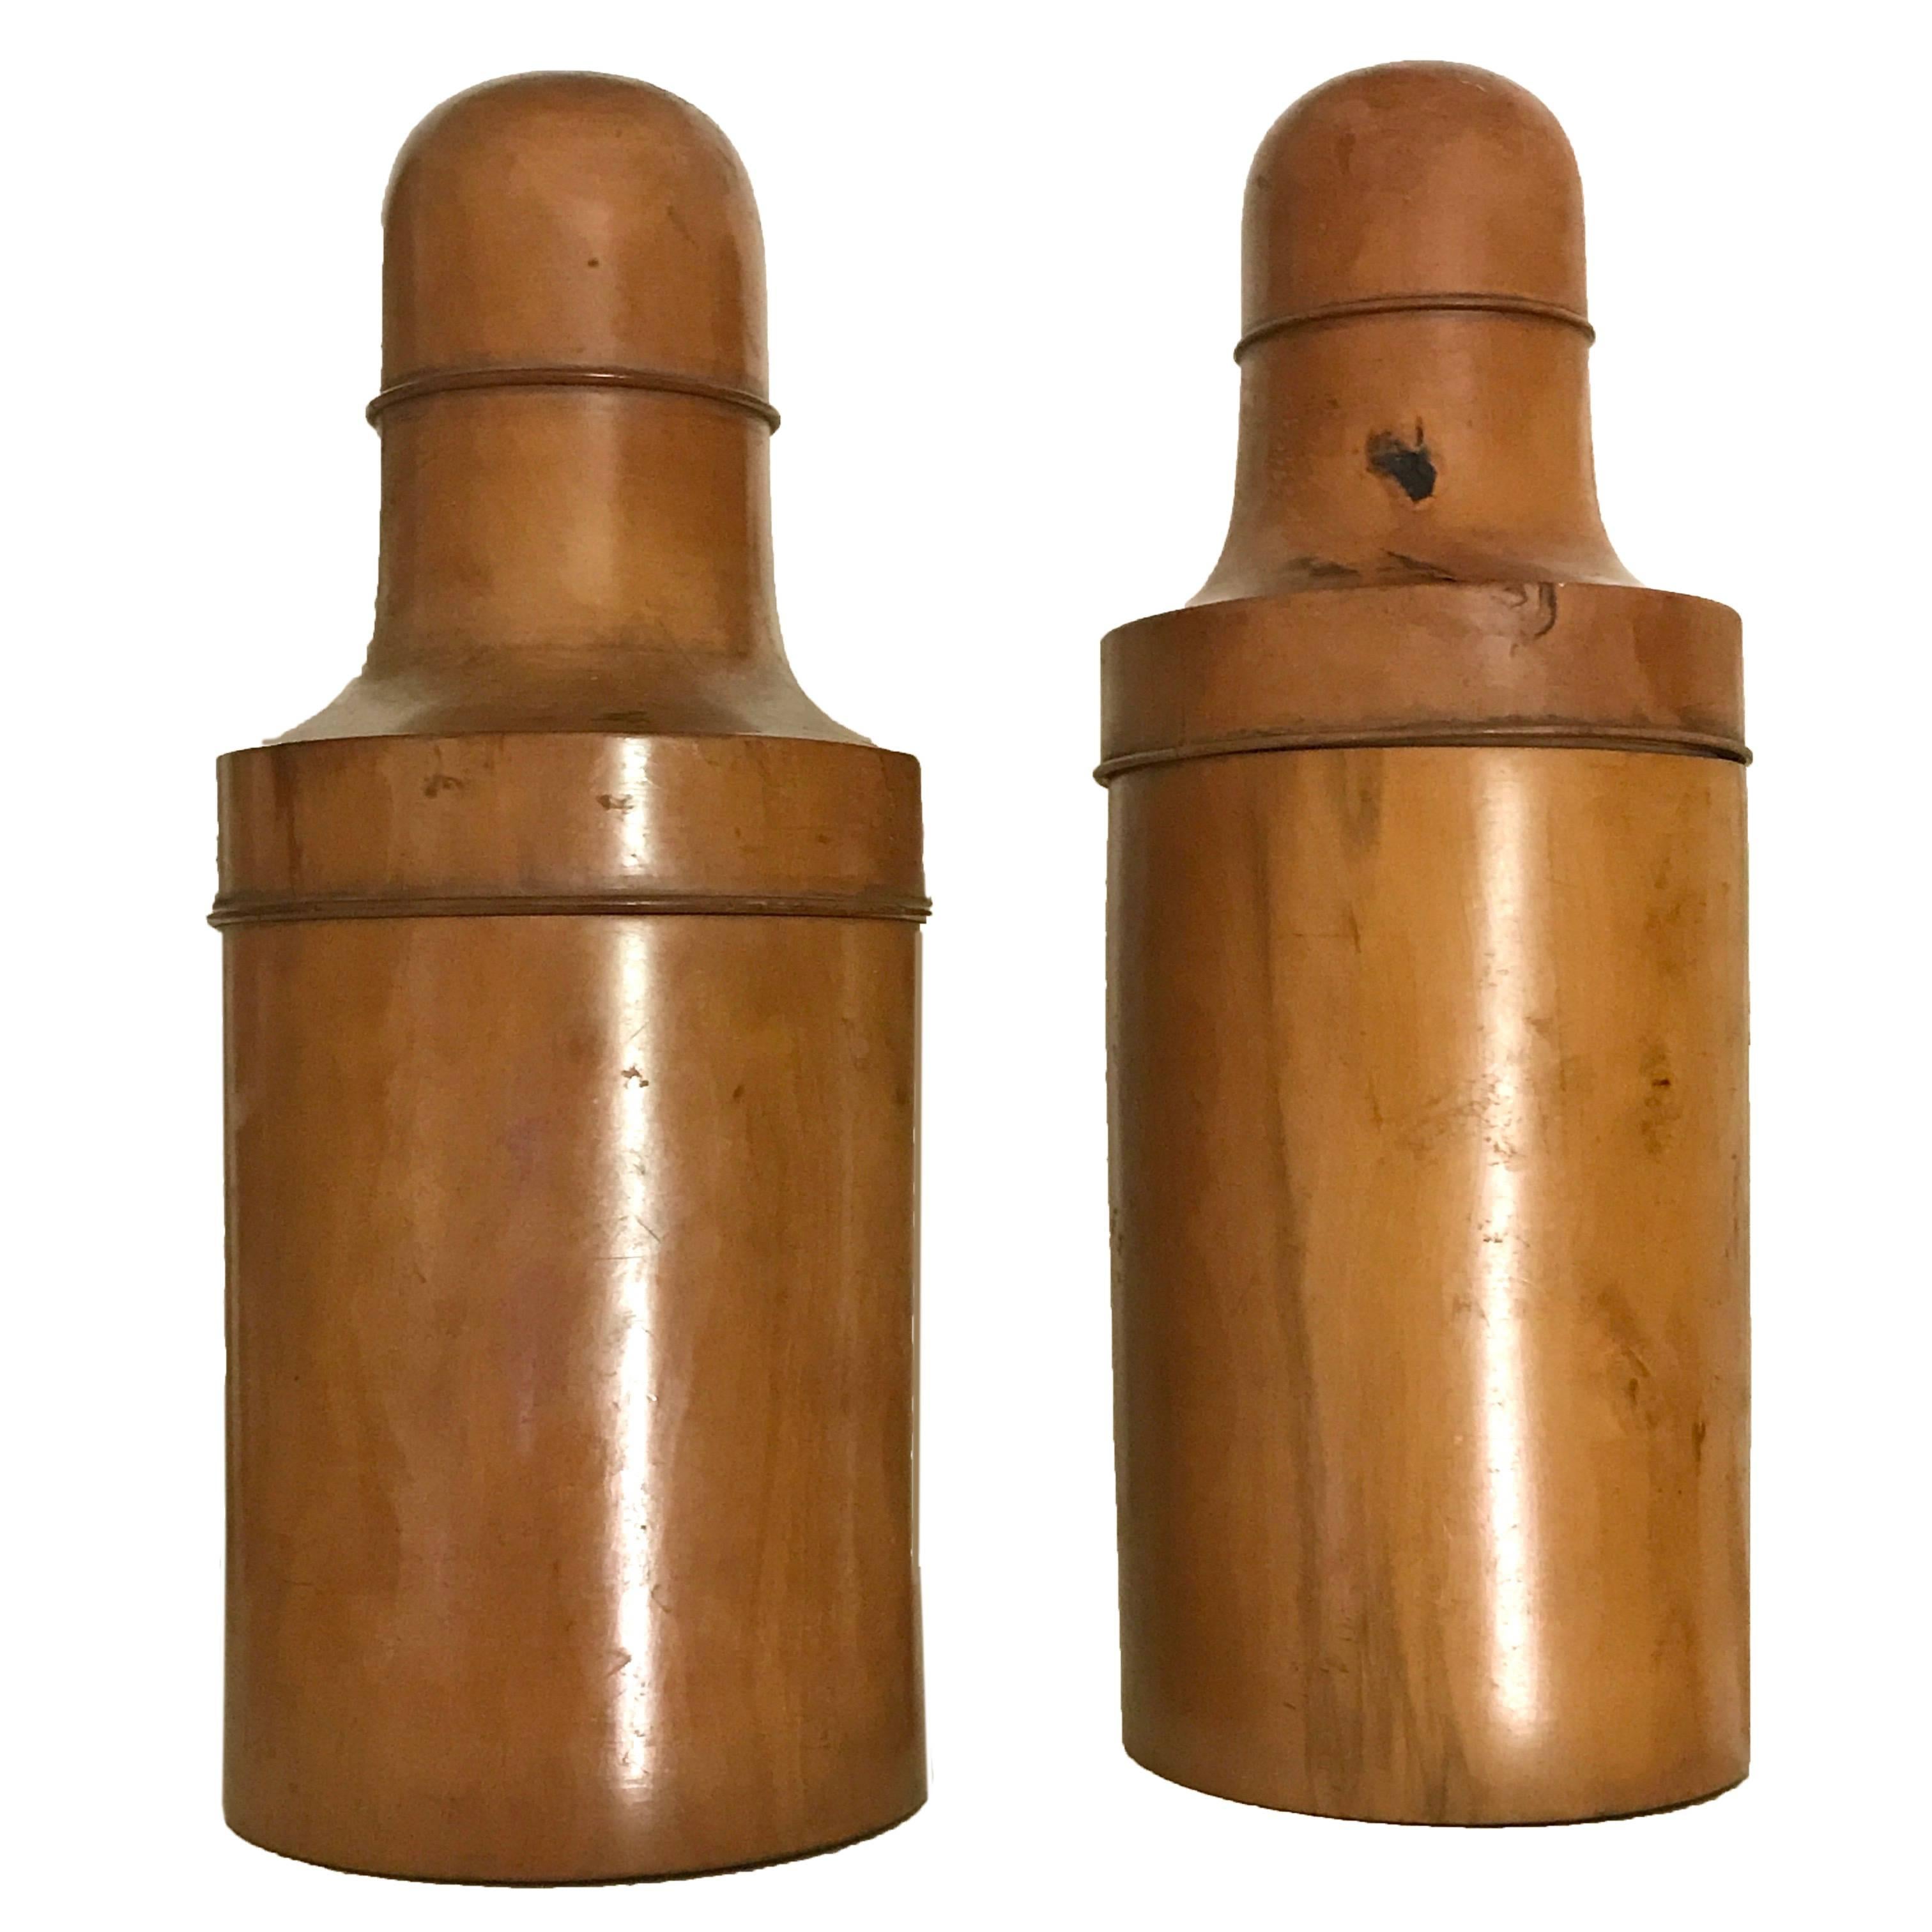 A pair of early 20th century boxwood containers (21 cm) that allowed the discreet storage of medicines destined to treatments of pathologies to be kept hidden.

A unique set that will make happy collectors who enjoy these marvellous and historical